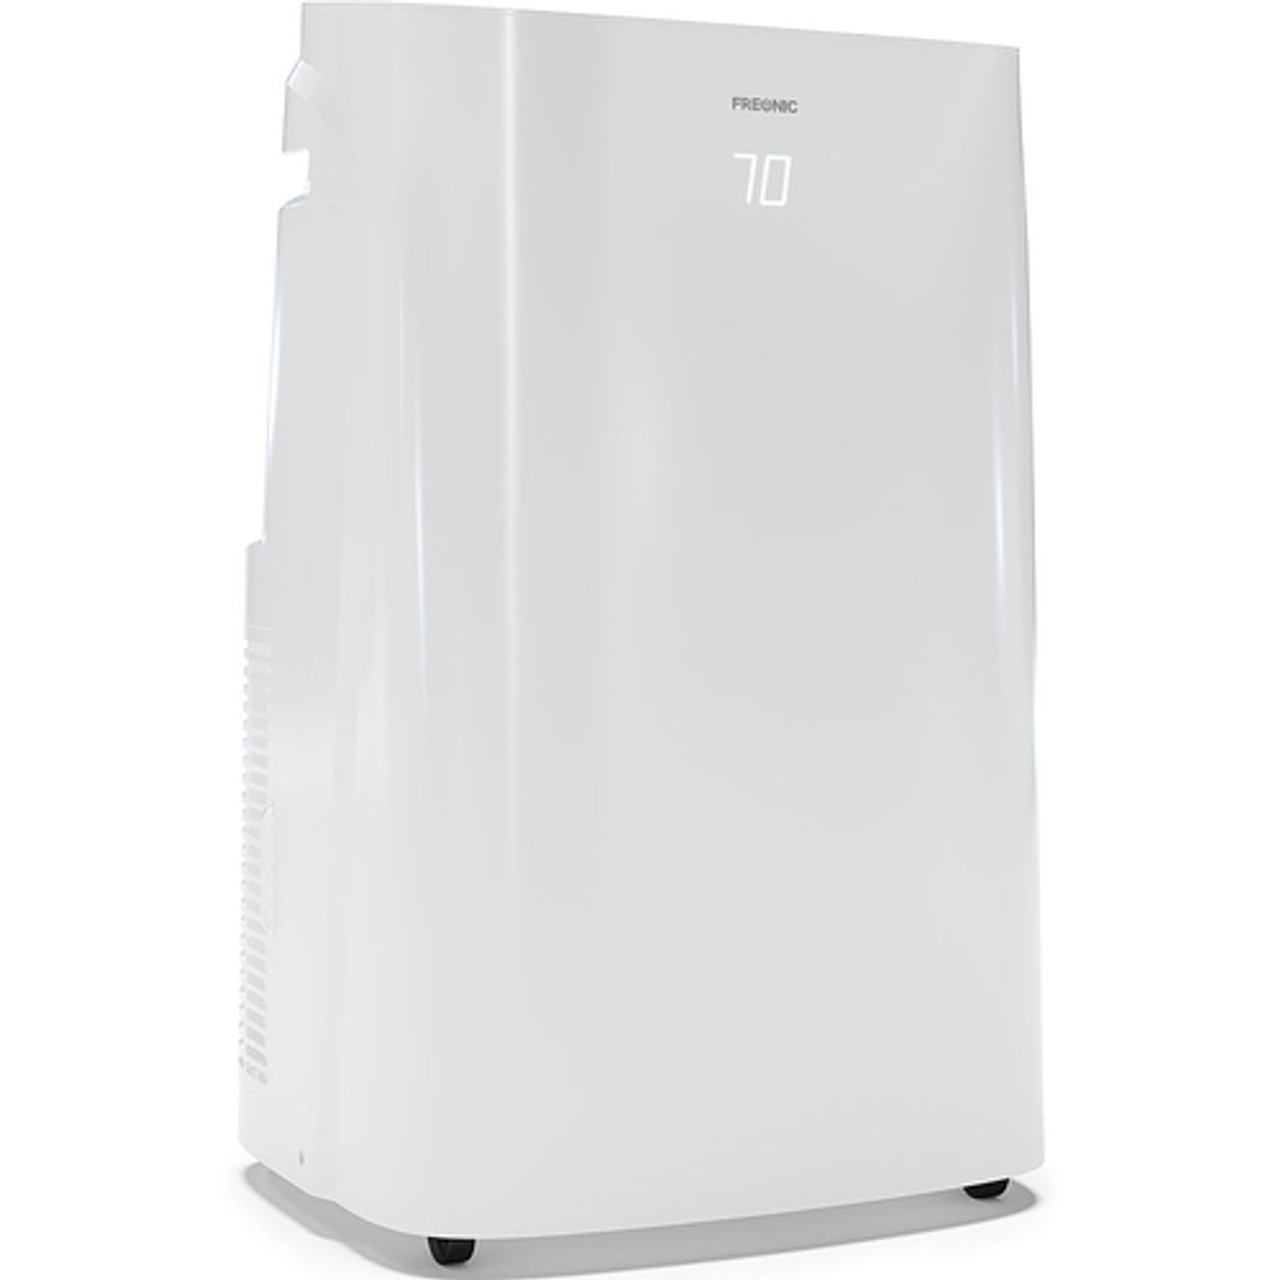 Freonic - 350 Sq. Ft. Portable Air Conditioner with Dehumidifier - White